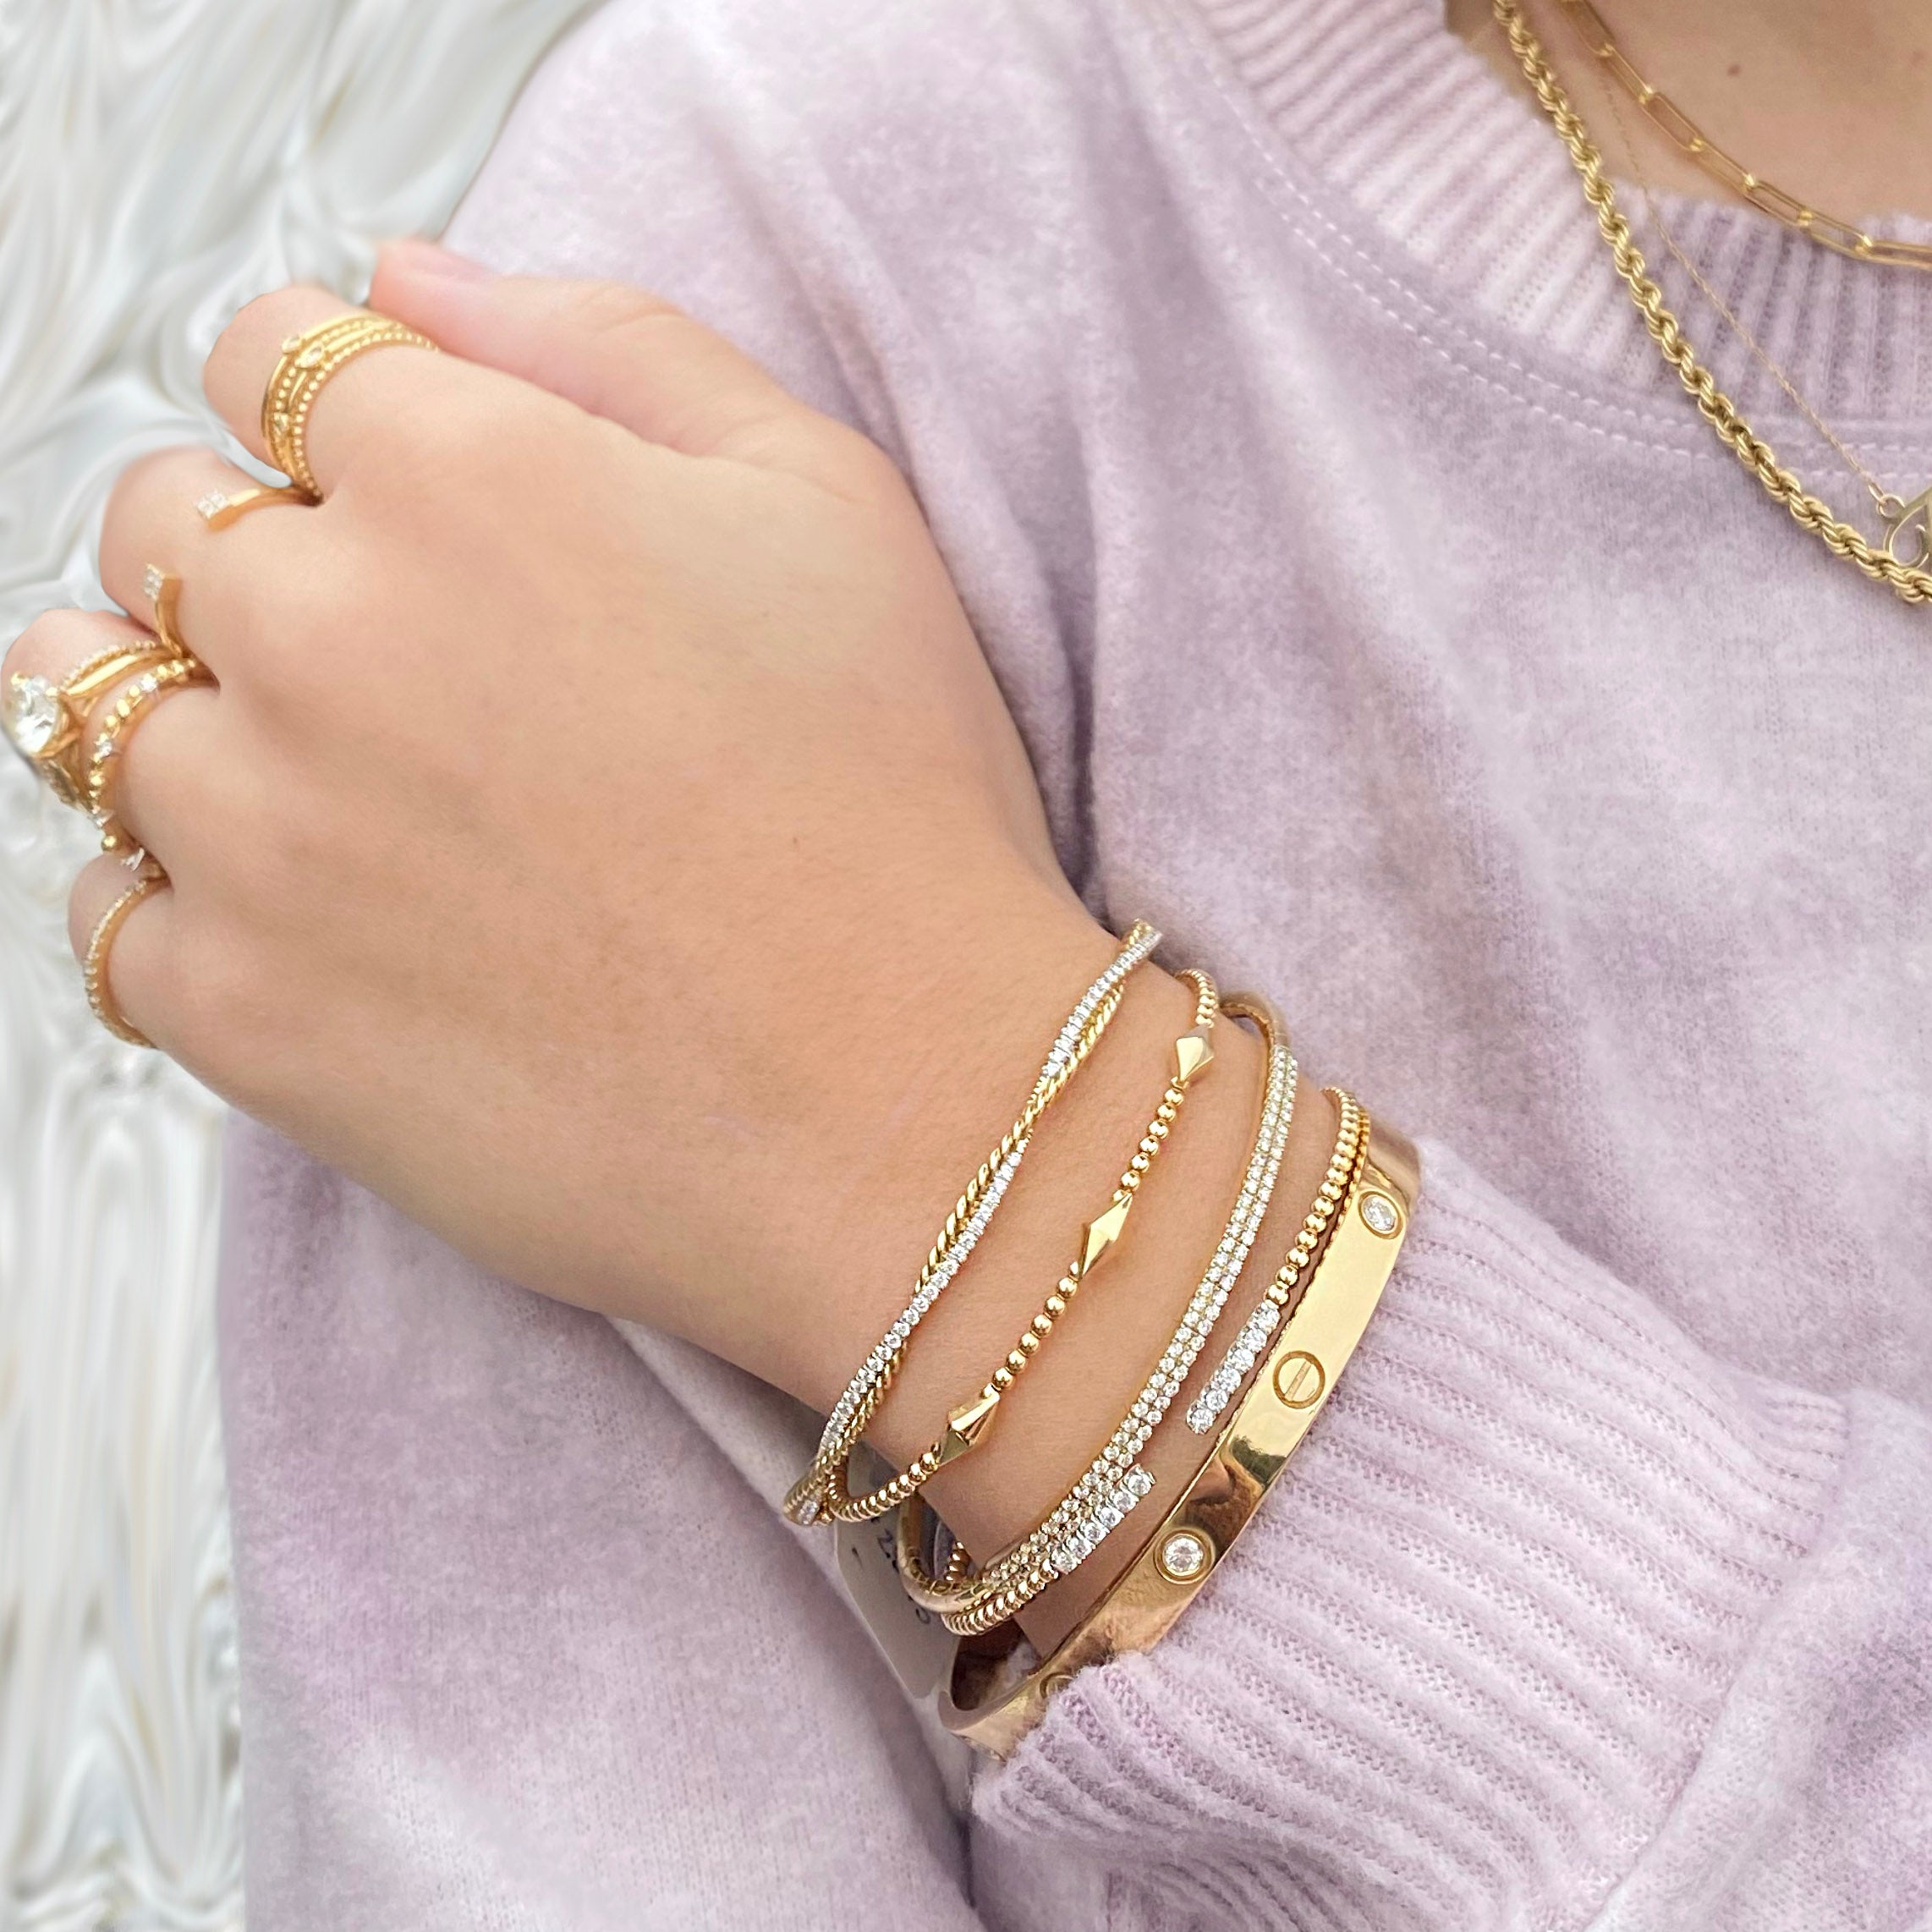 Bracelets-Which Should You Own?